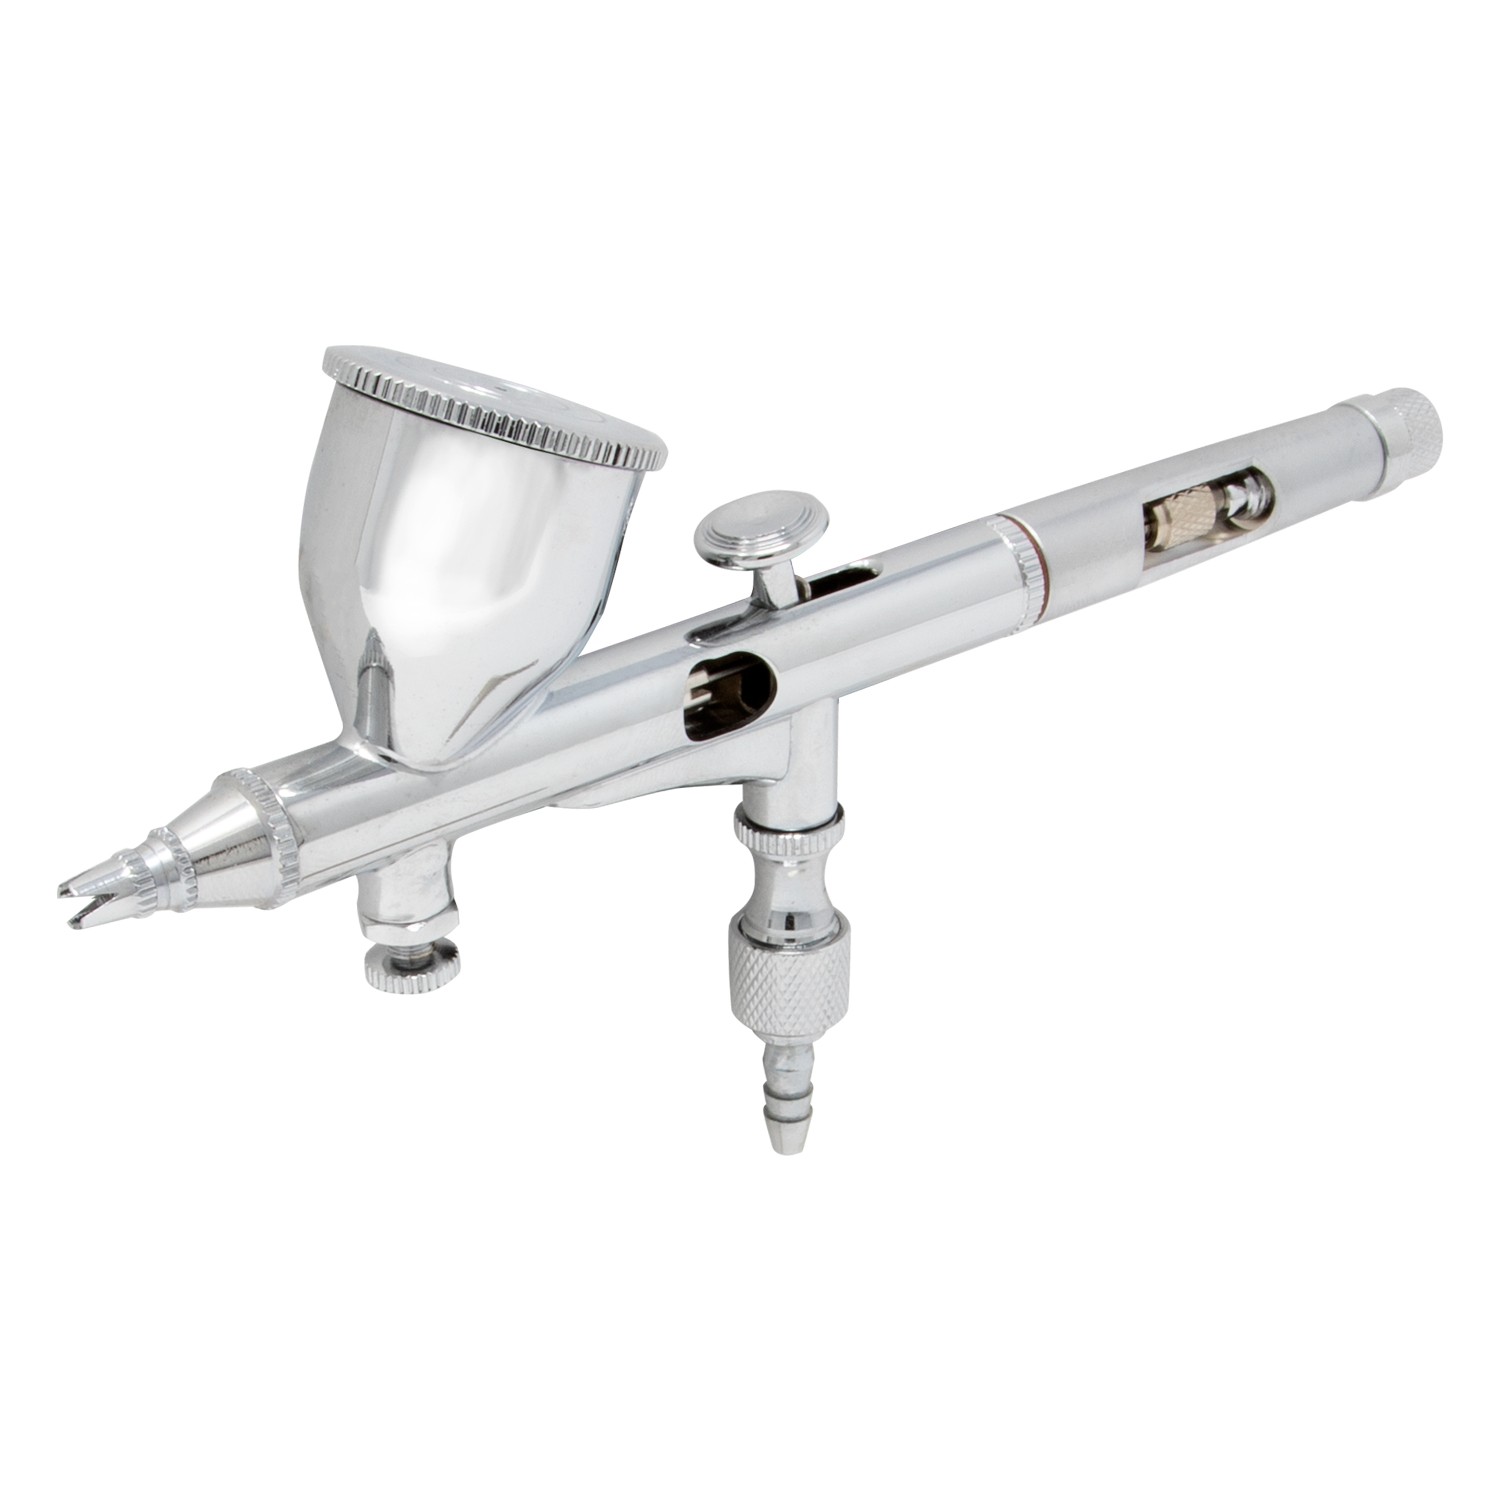 Dual Action Gravity Feed Airbrush